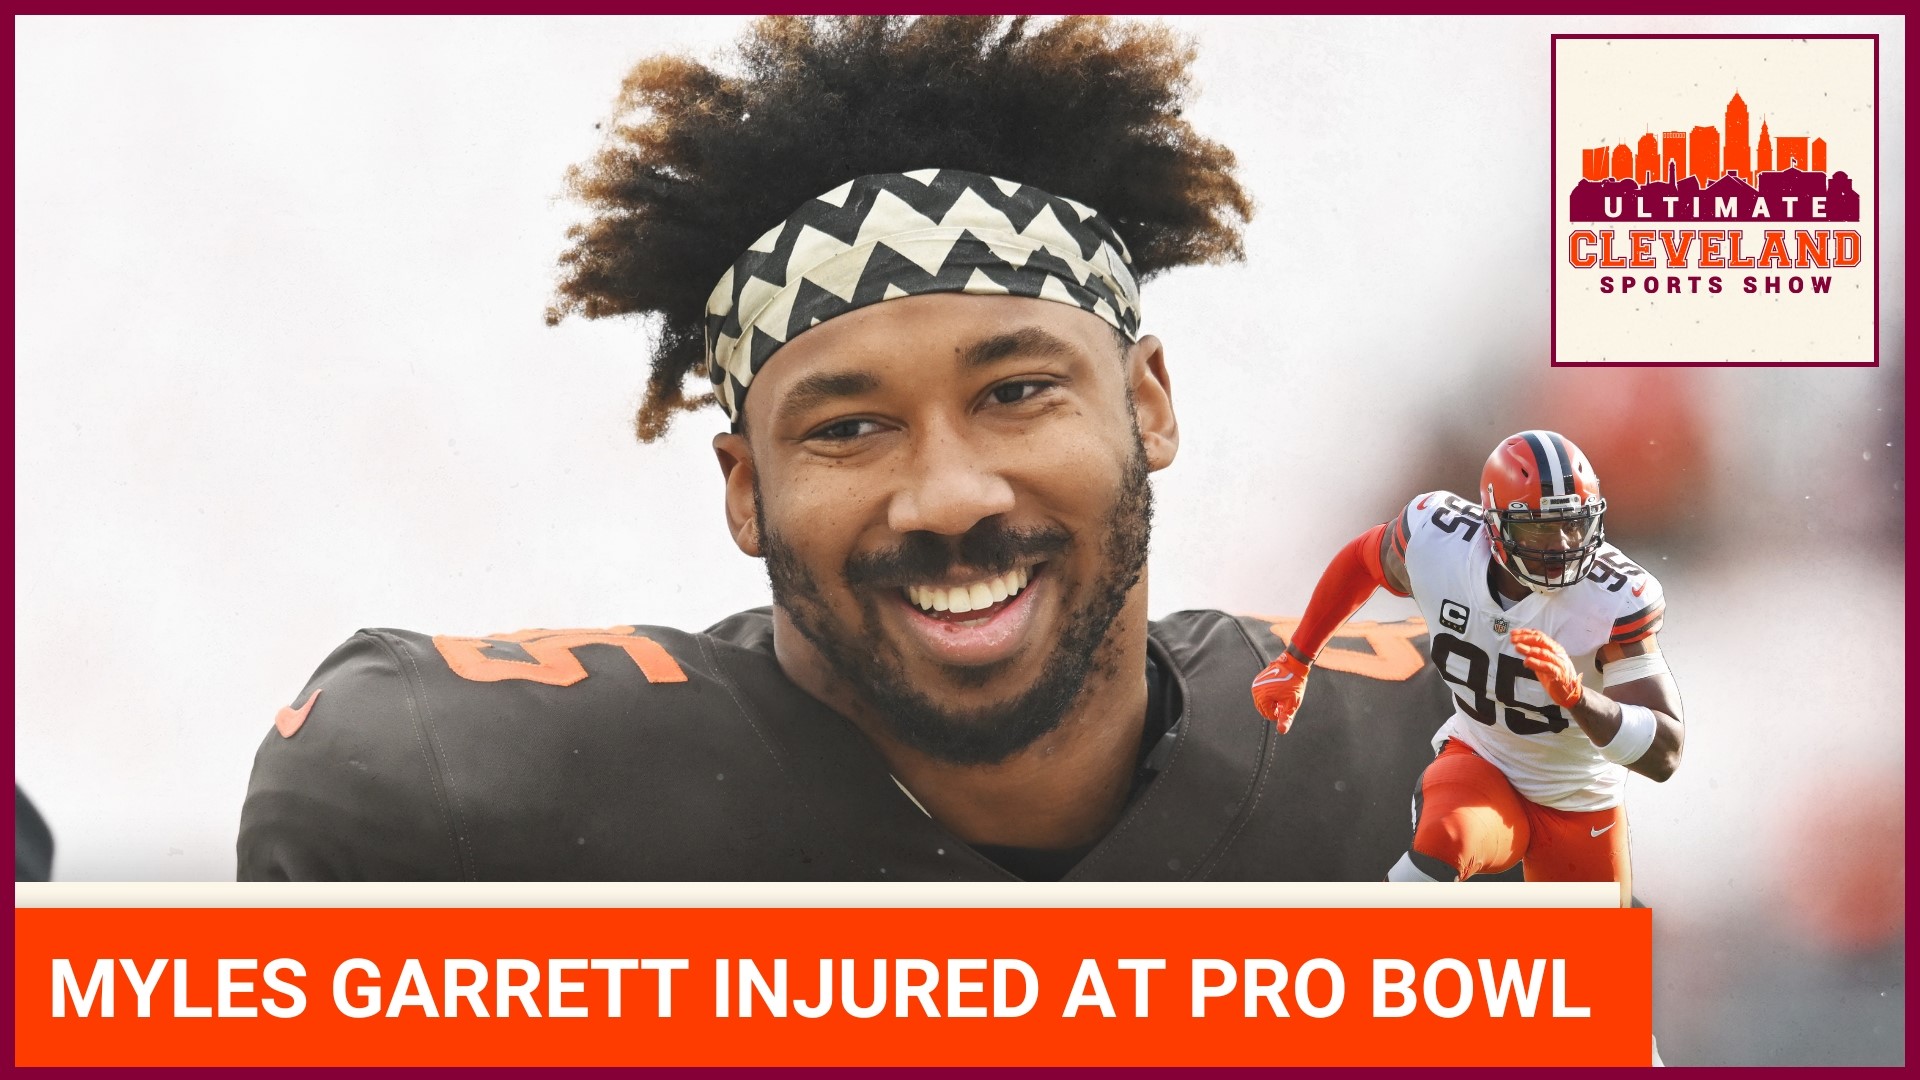 How significant was the injury suffered by Myles Garrett during the Pro Bowl?